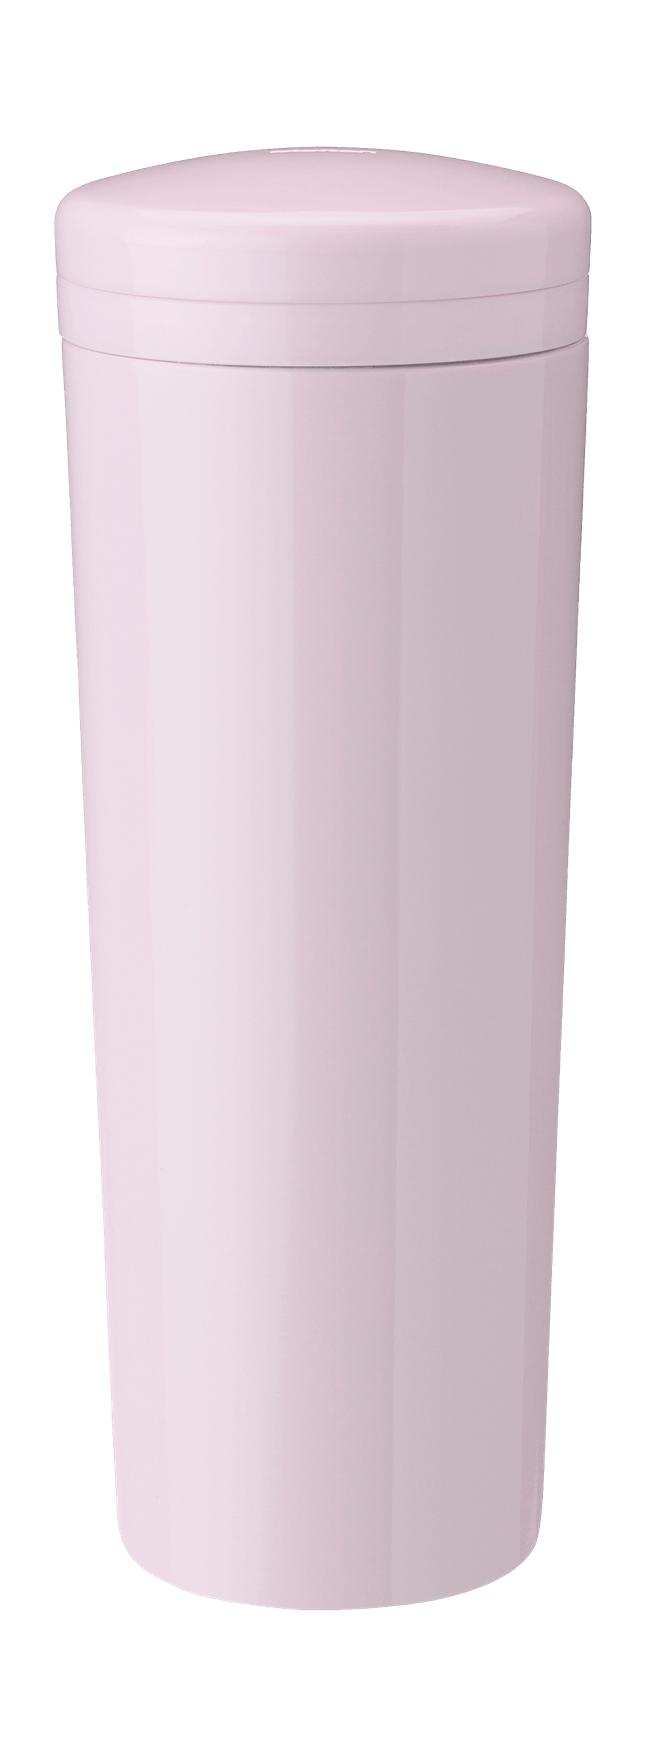 Stelton Carrie Thermos Flasche 0,5 l, Rose